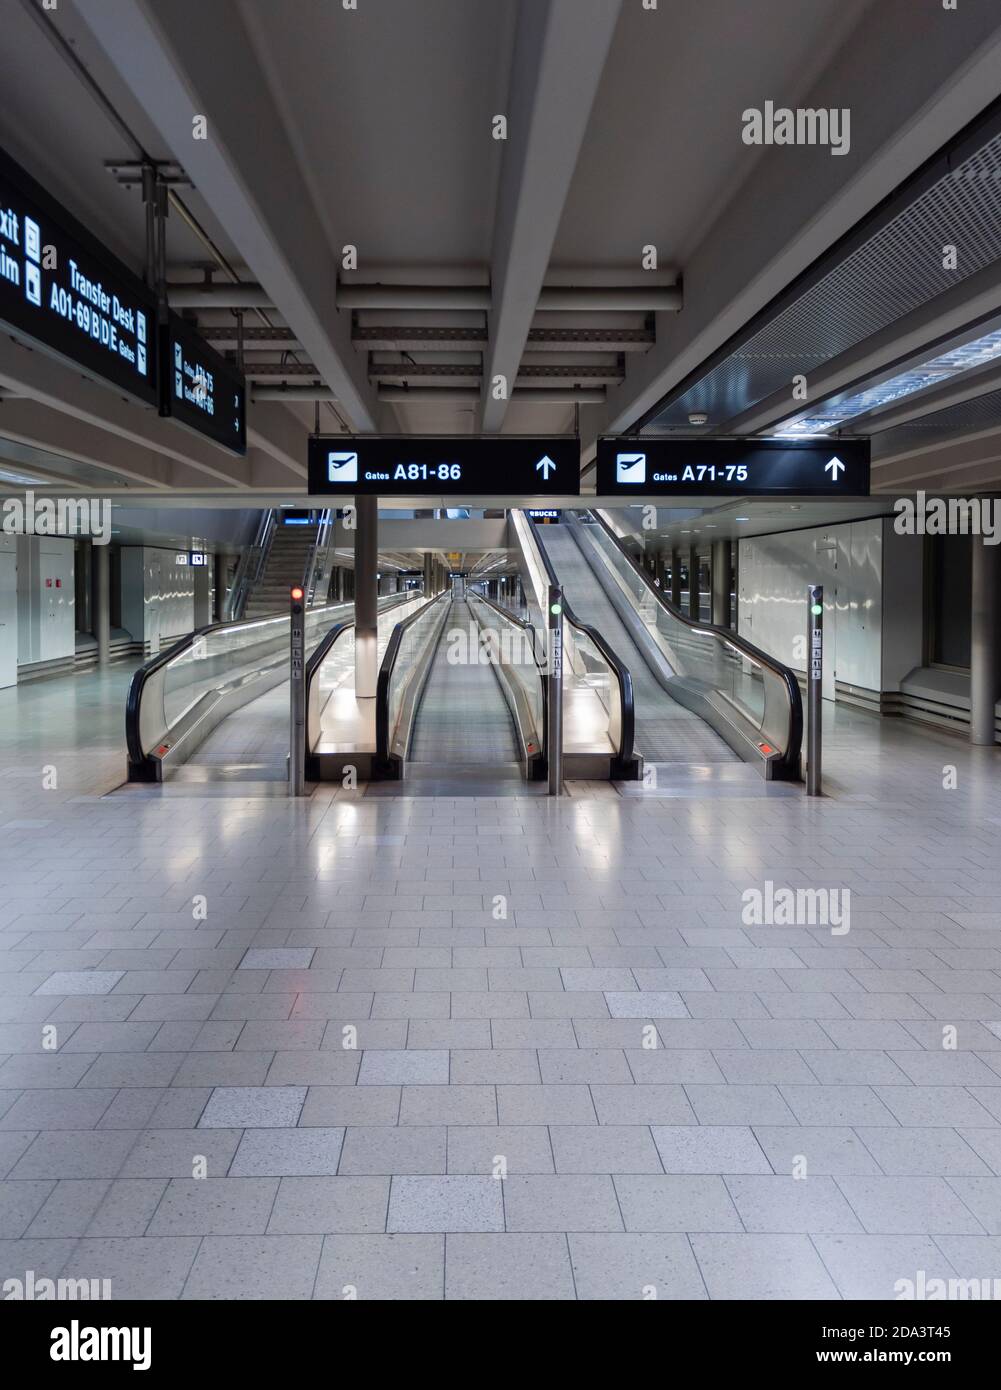 Zurich, Switzerland - 13 Oct 2020: Empty escalators at the terminal building of Zurich Kloten airport. Due to the worldwide Covid pandemic, air travel Stock Photo